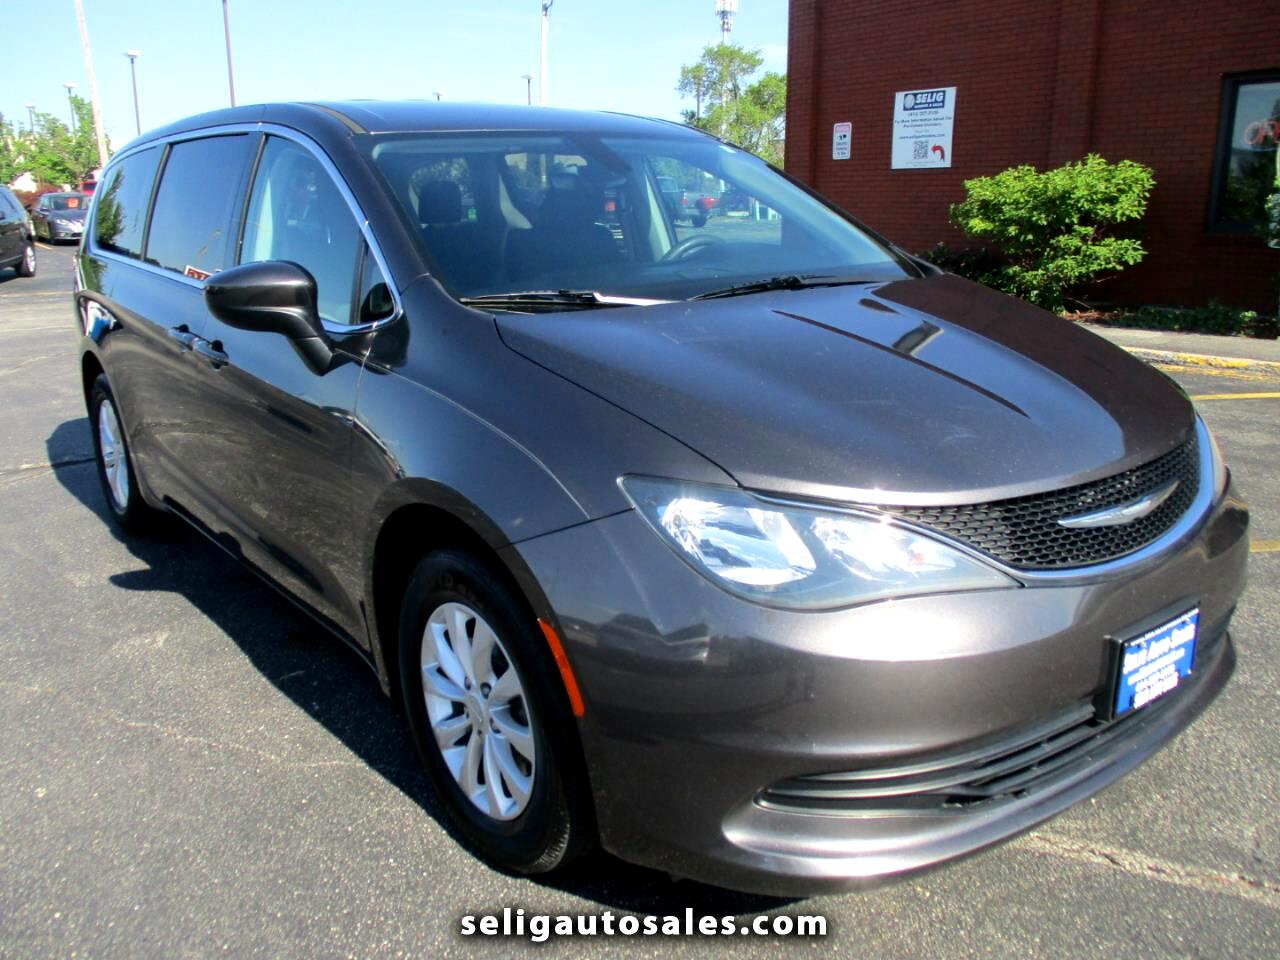 Chrysler Pacifica Touring 2017